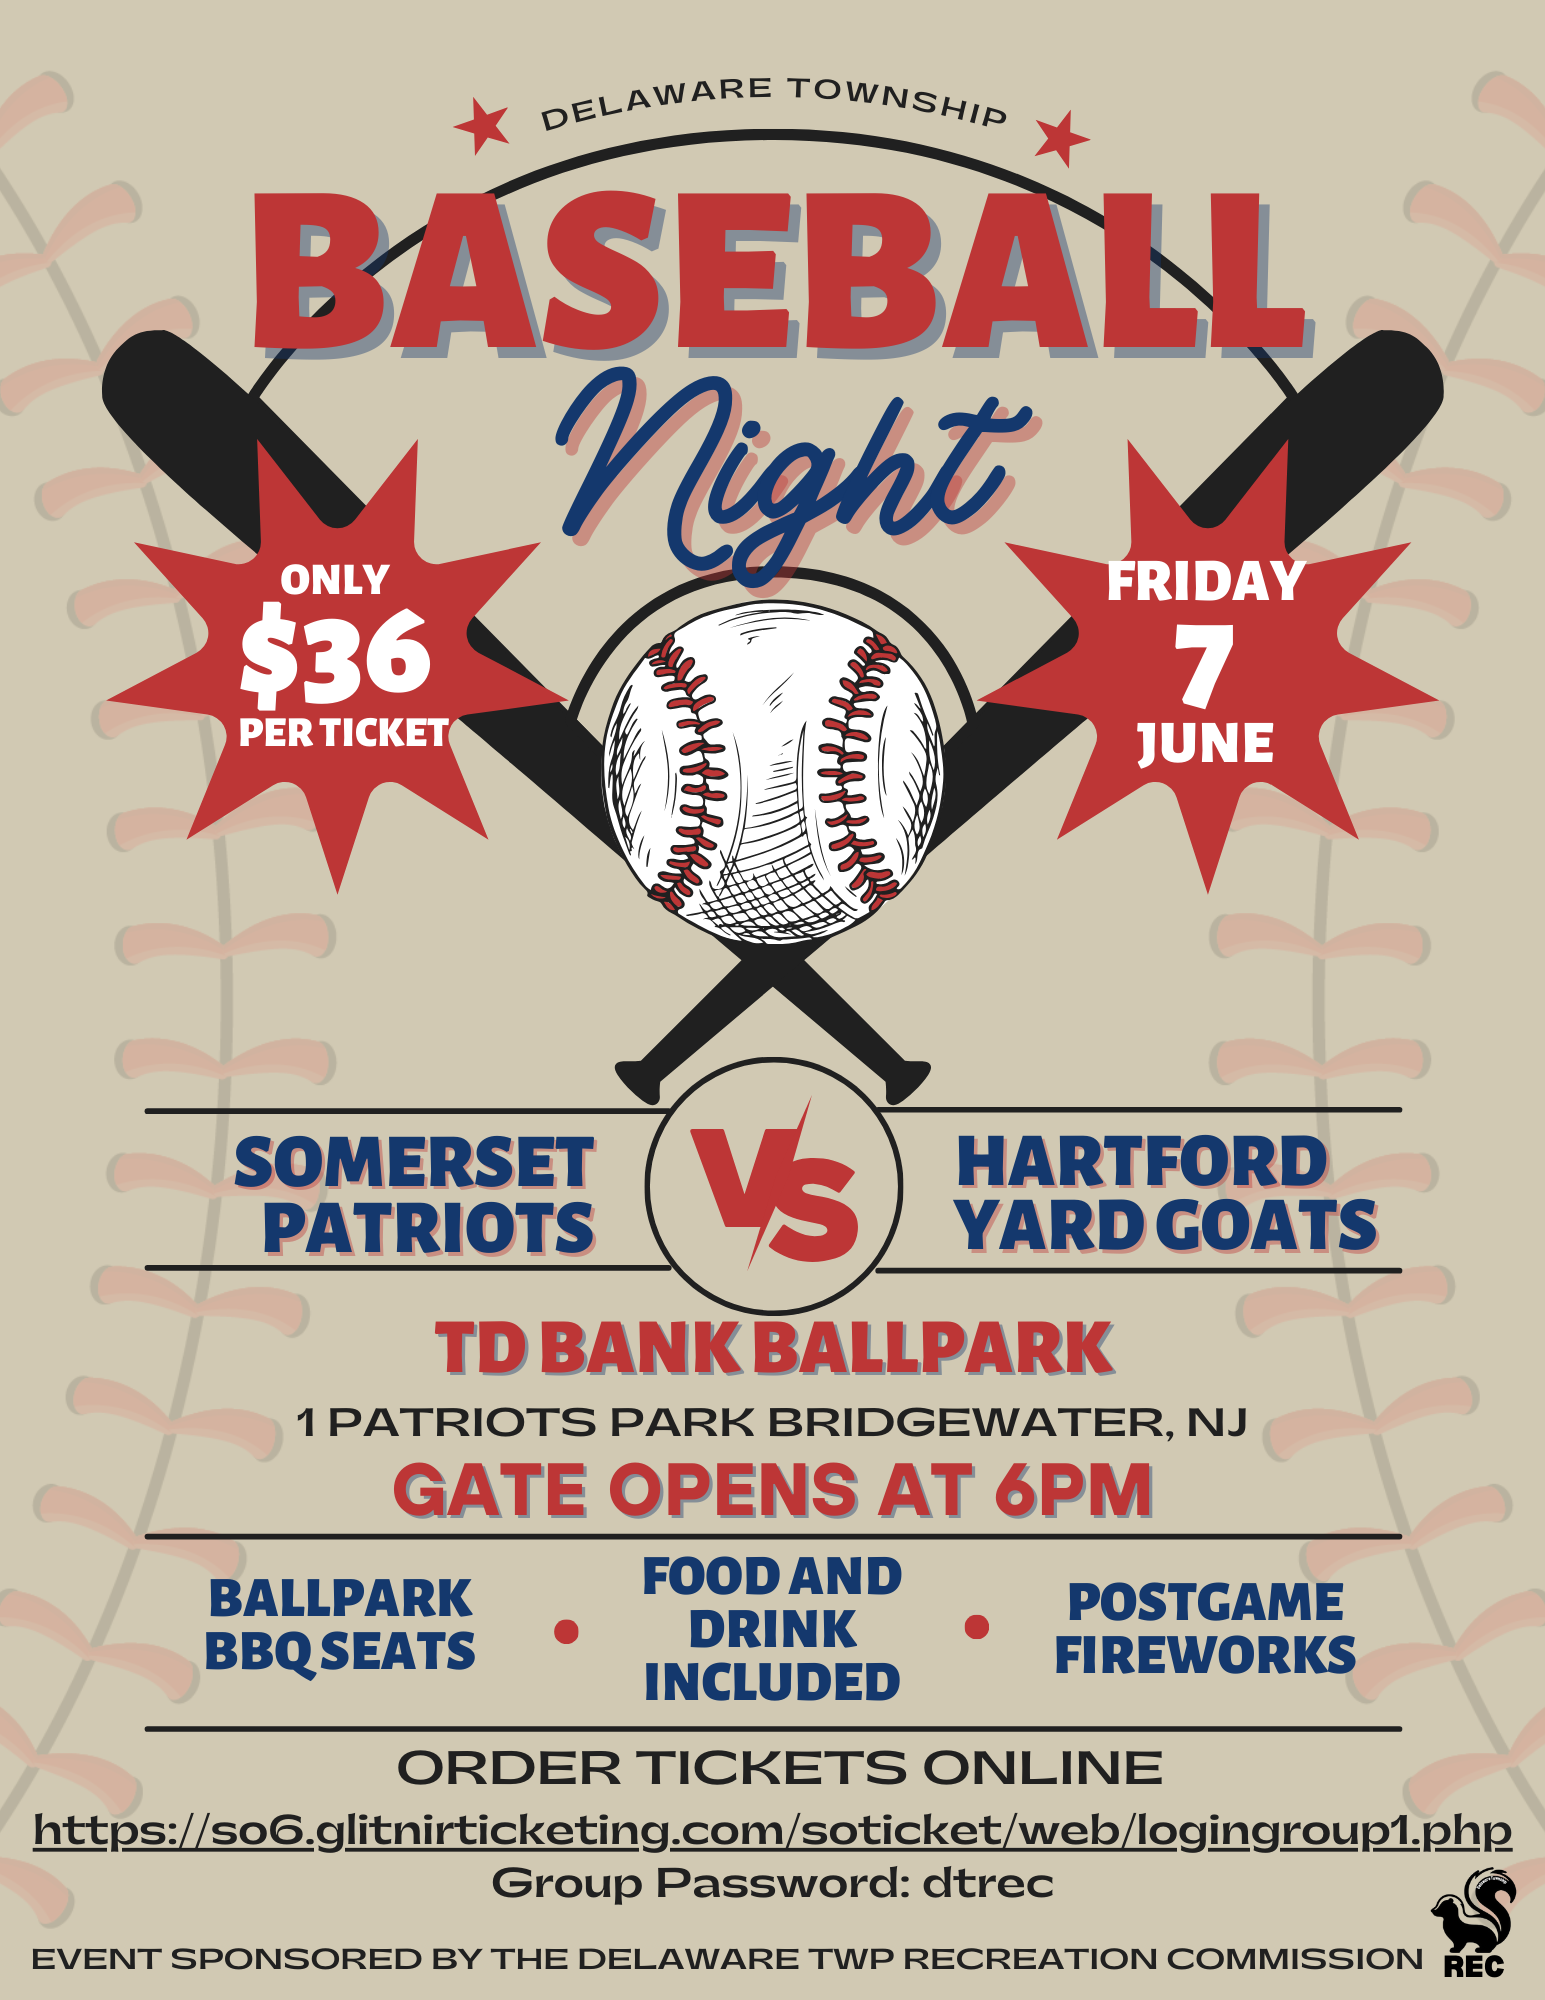 Patriots Baseball game event flyer. The flyer has a tan background with the stitching of a baseball overtop. Details about the event are in blue and red text, and two bats with a baseball adorn the center.